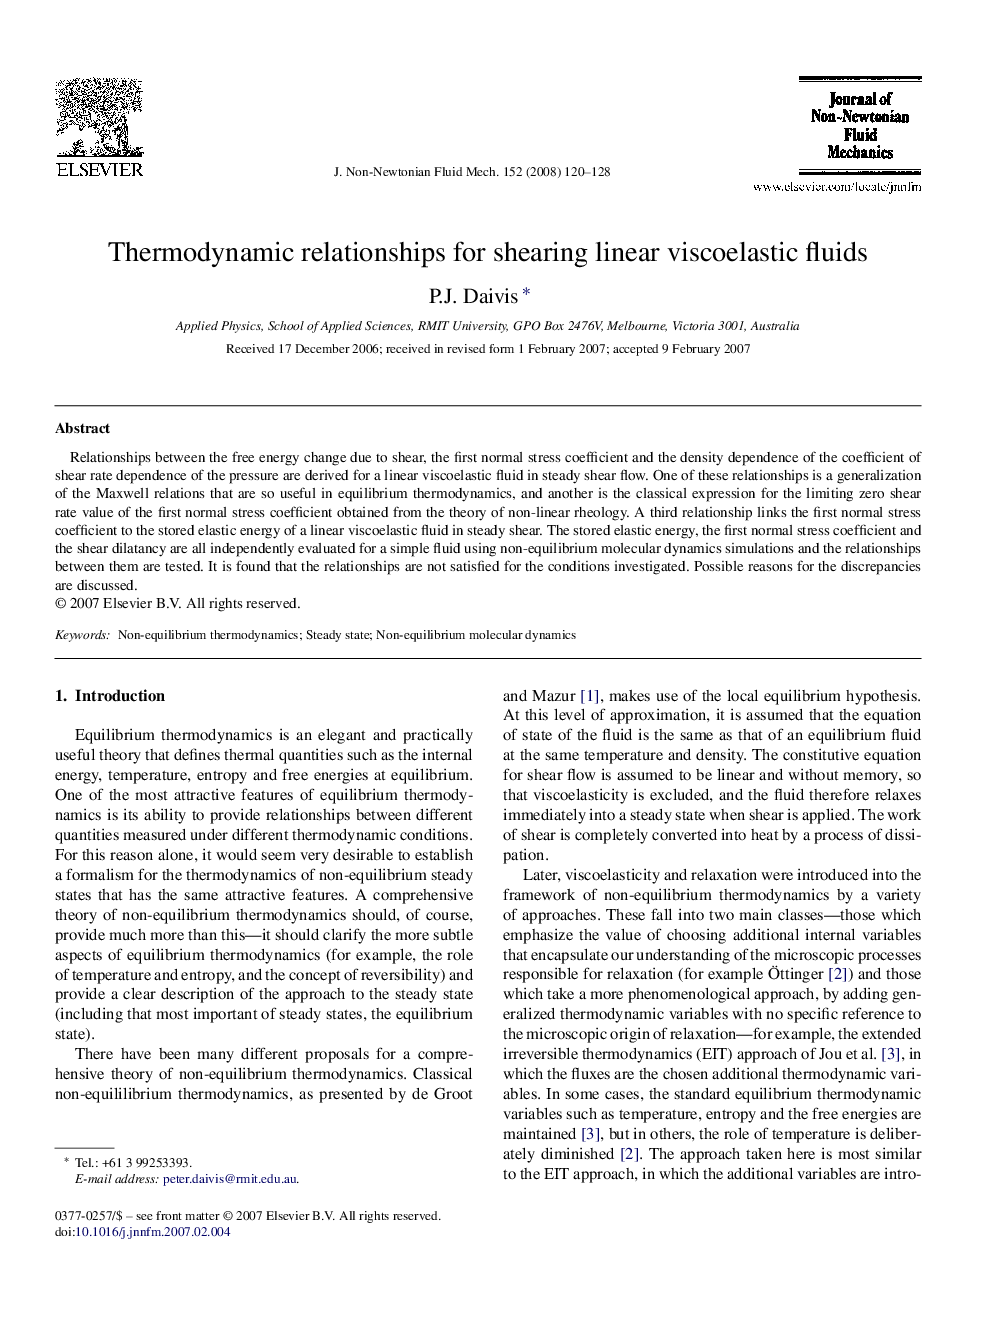 Thermodynamic relationships for shearing linear viscoelastic fluids